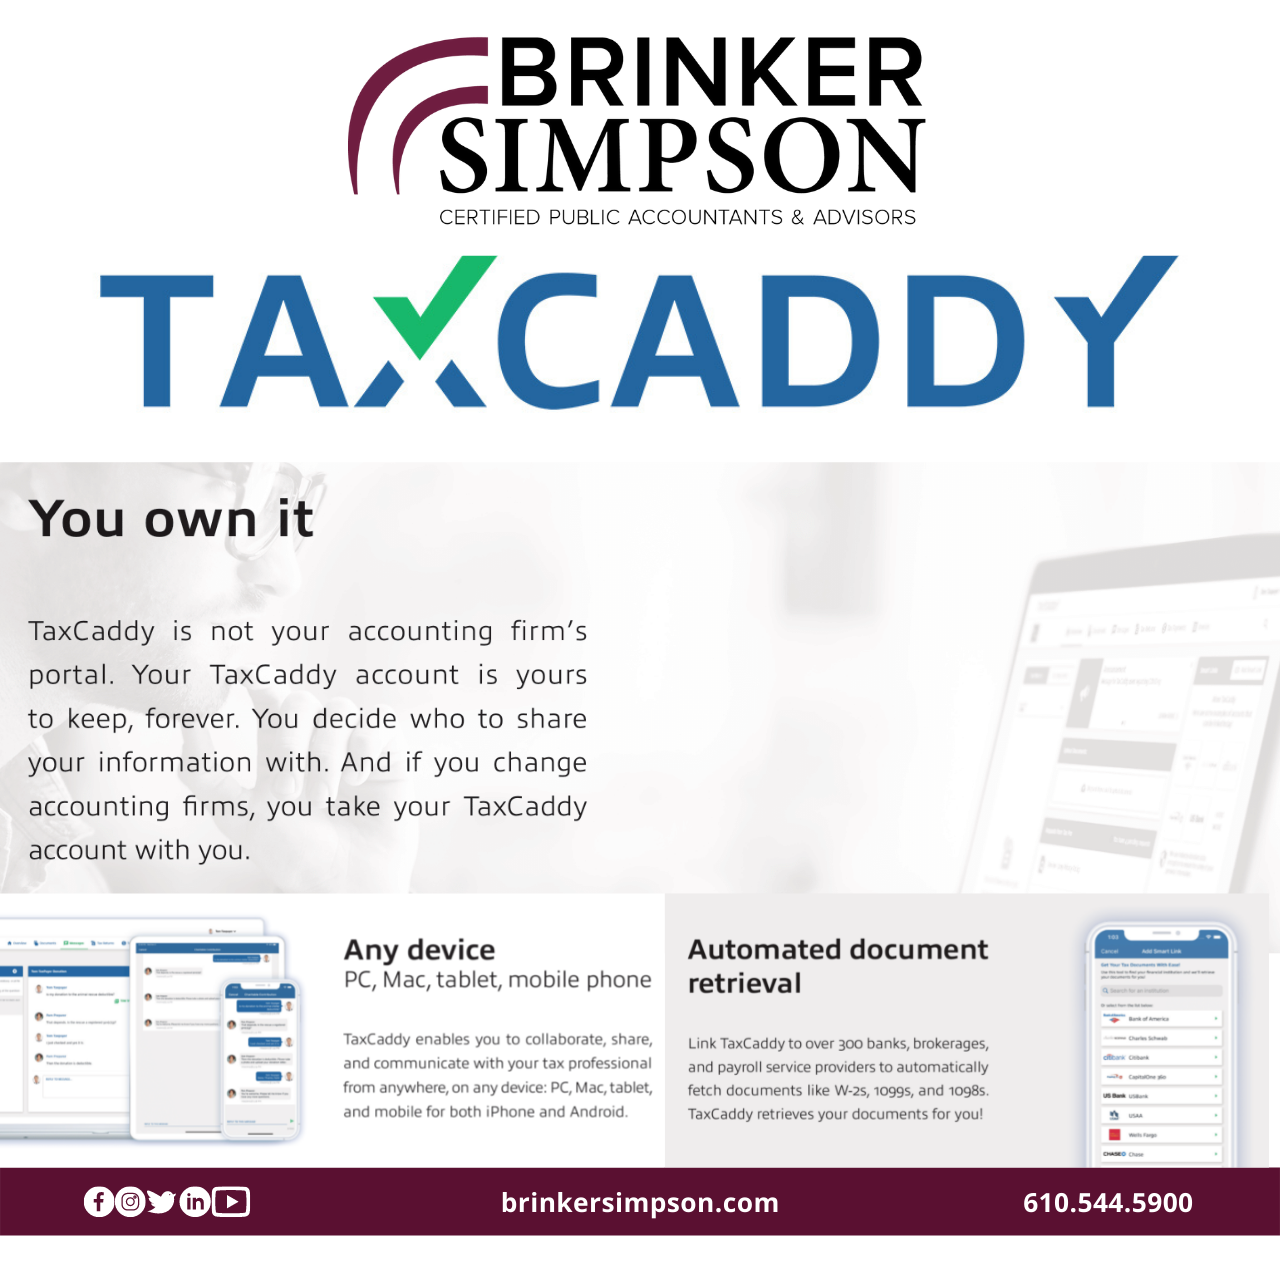 Brinker Simpson Simplifies Tax Time With TaxCaddy - 5 Tips